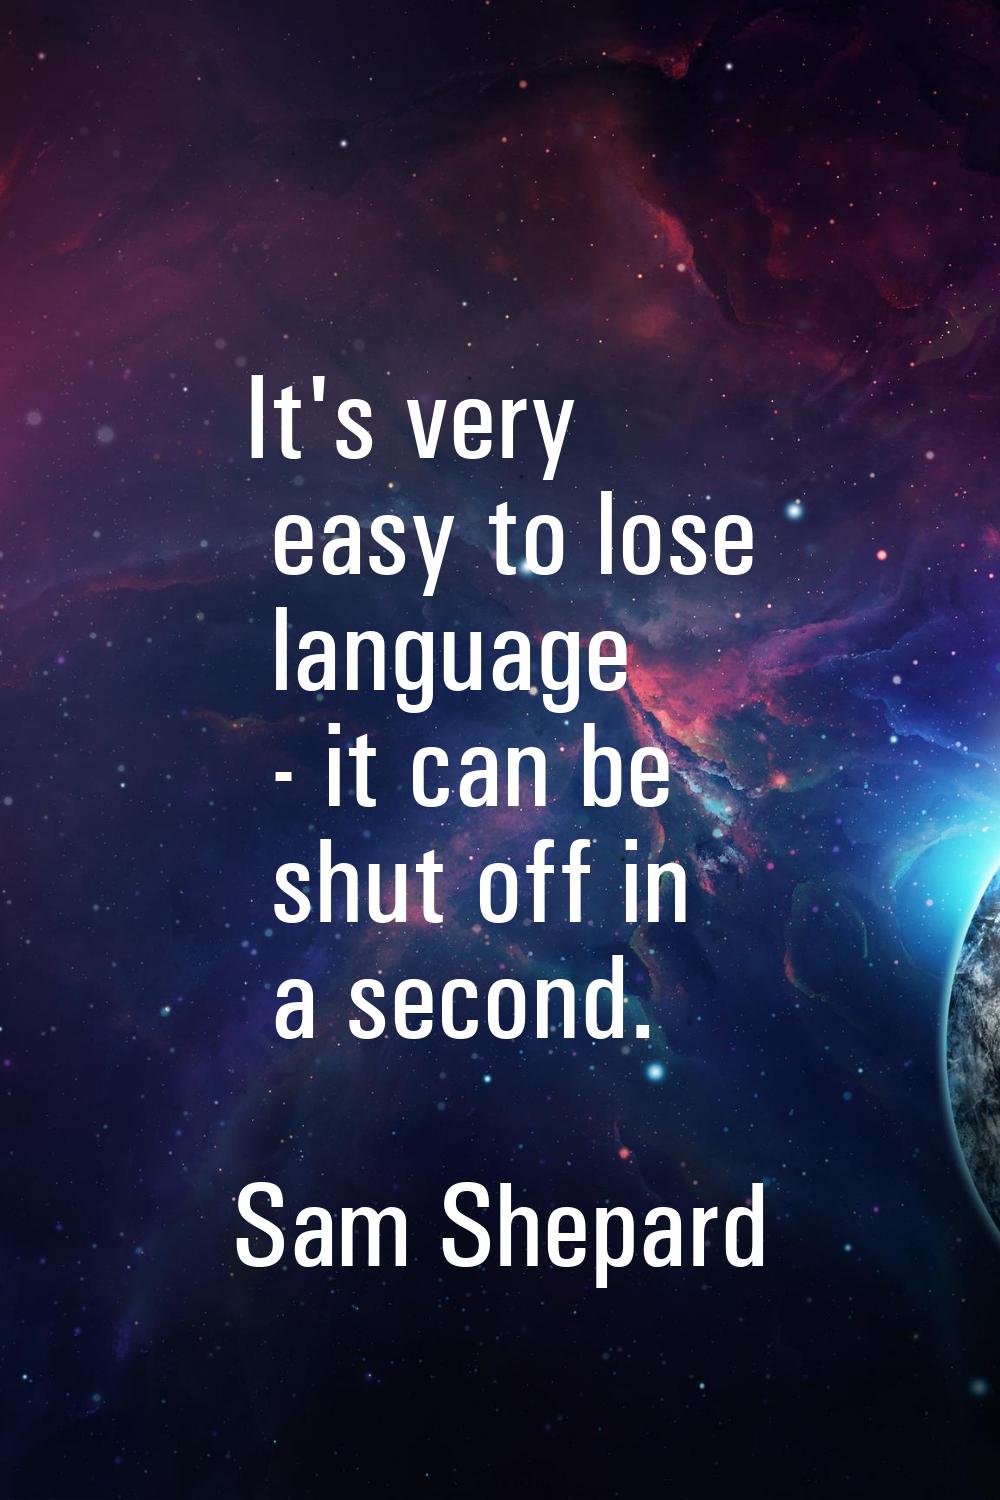 It's very easy to lose language - it can be shut off in a second.